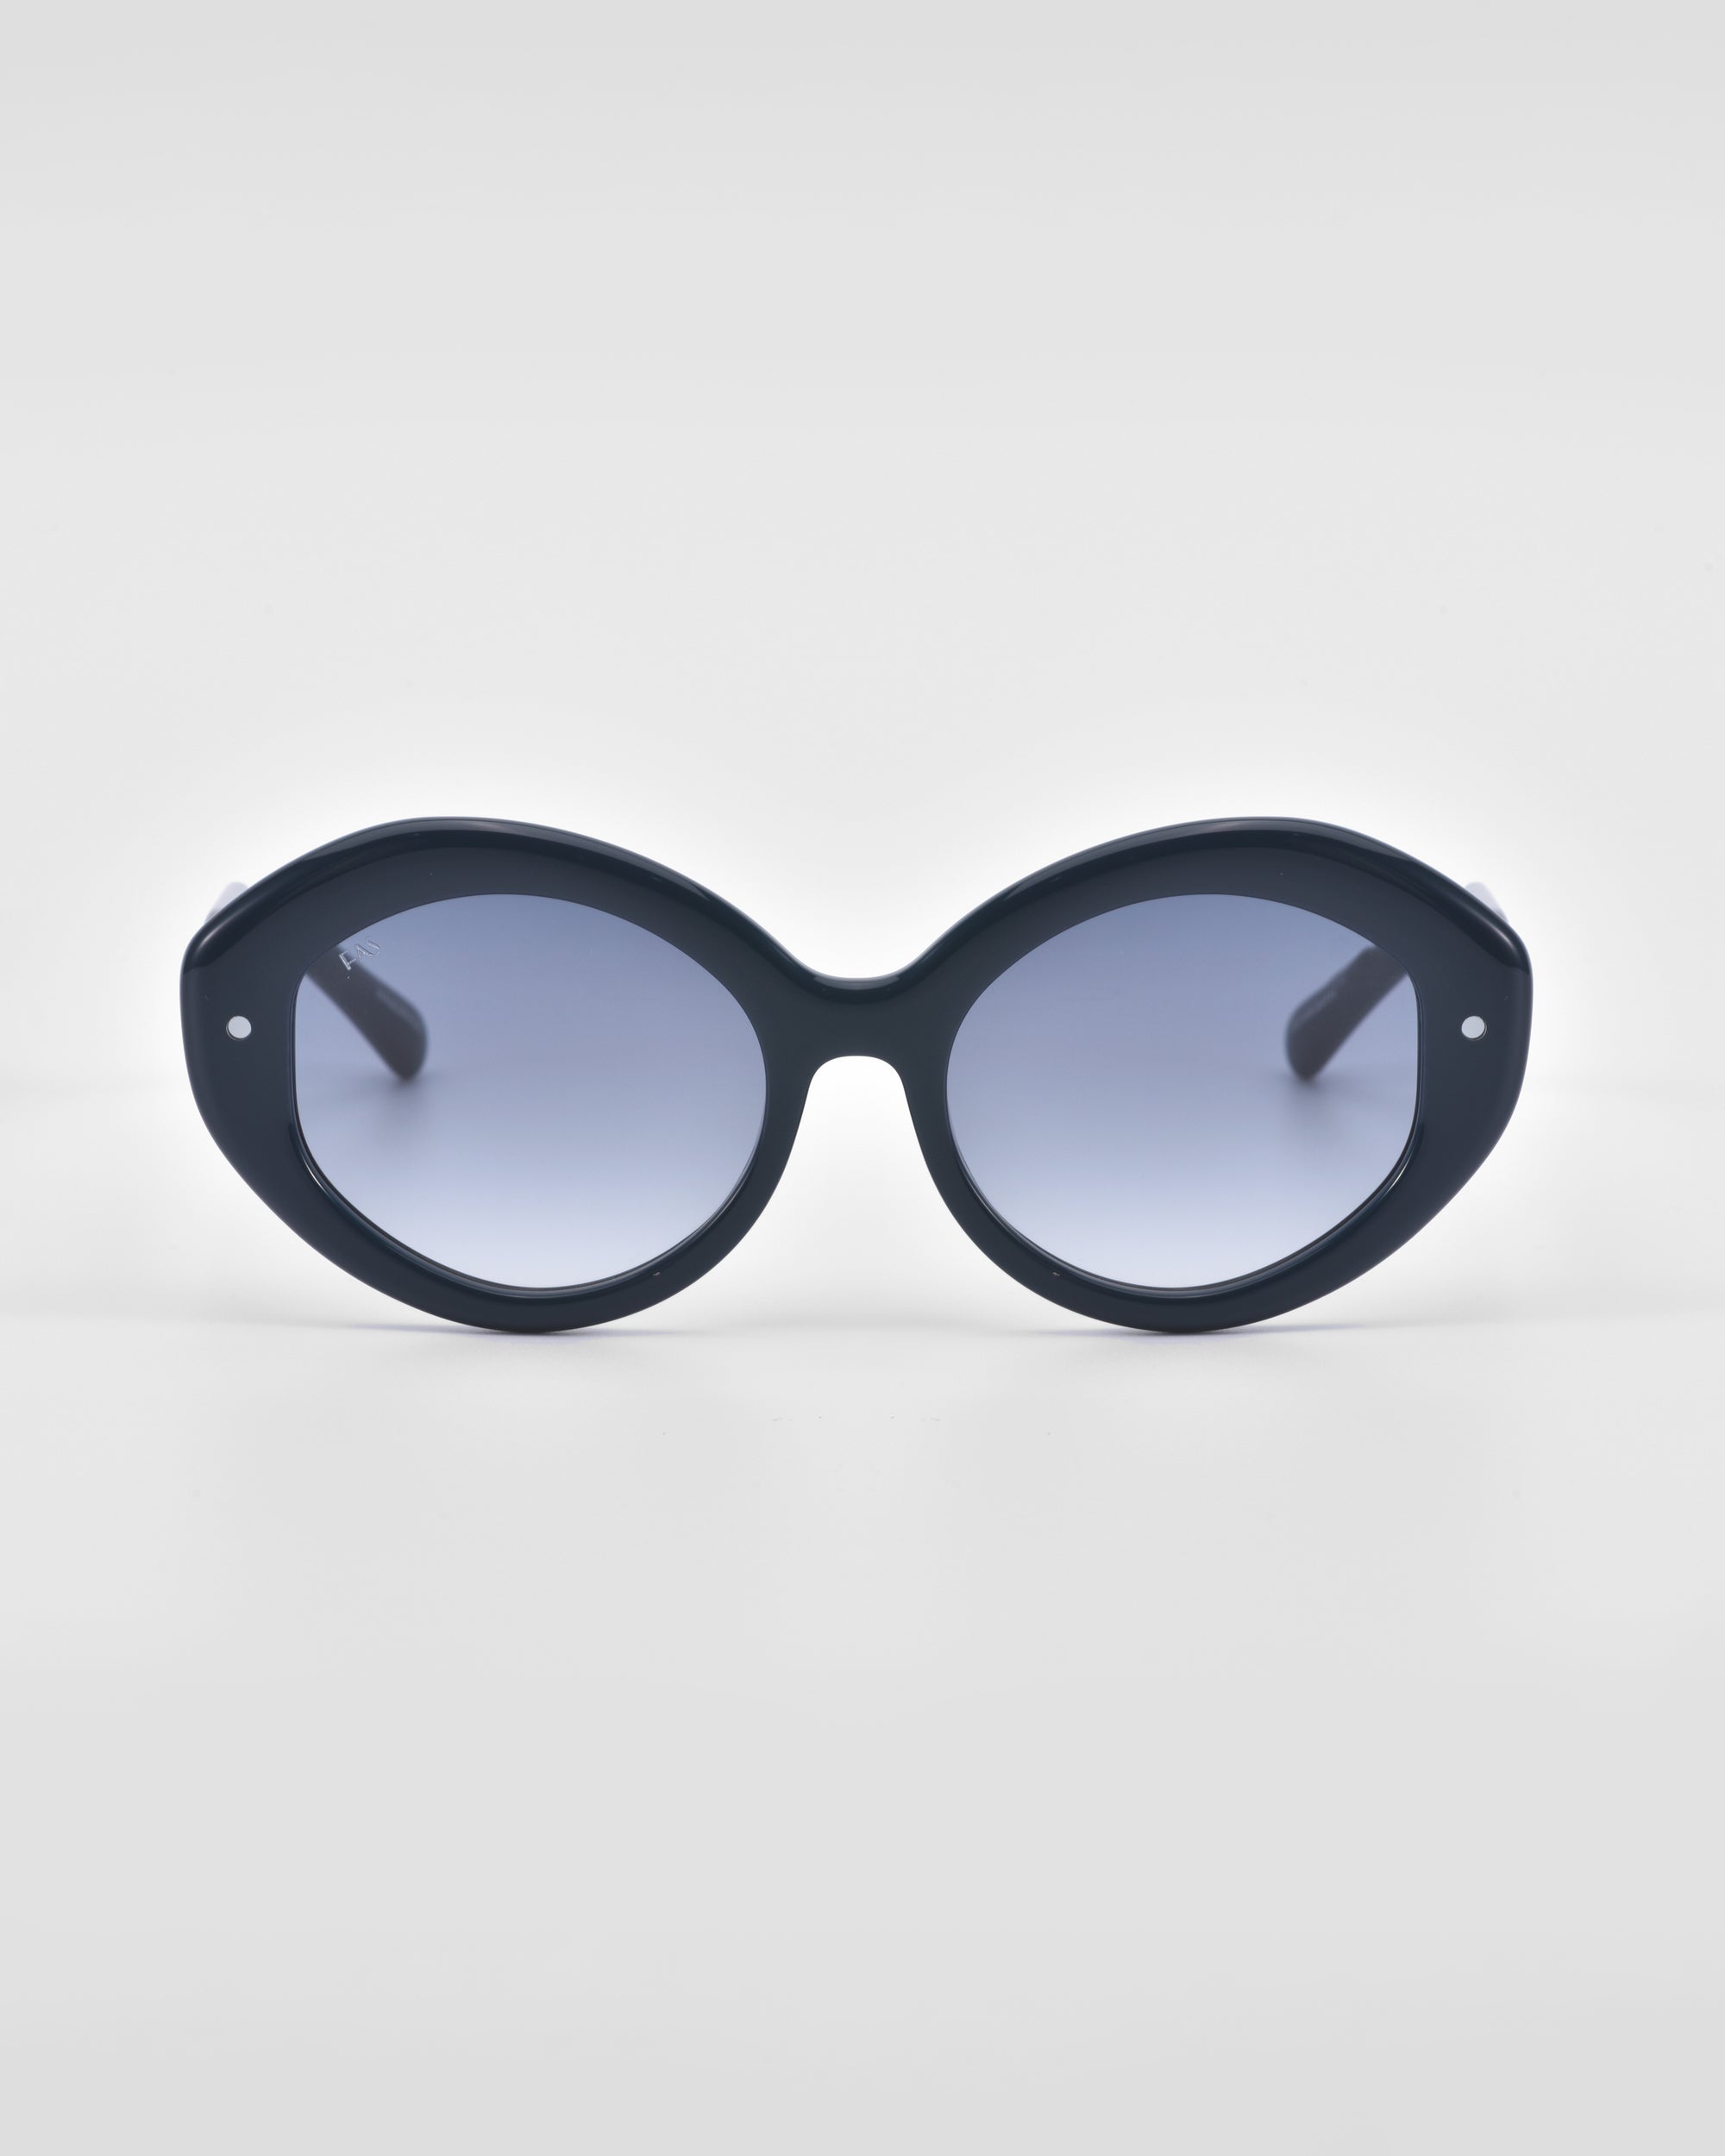 A pair of For Art&#39;s Sake® Helios sunglasses featuring an oversized, round design with tinted lenses is displayed against a plain white background, offering a touch of luxury eyewear.